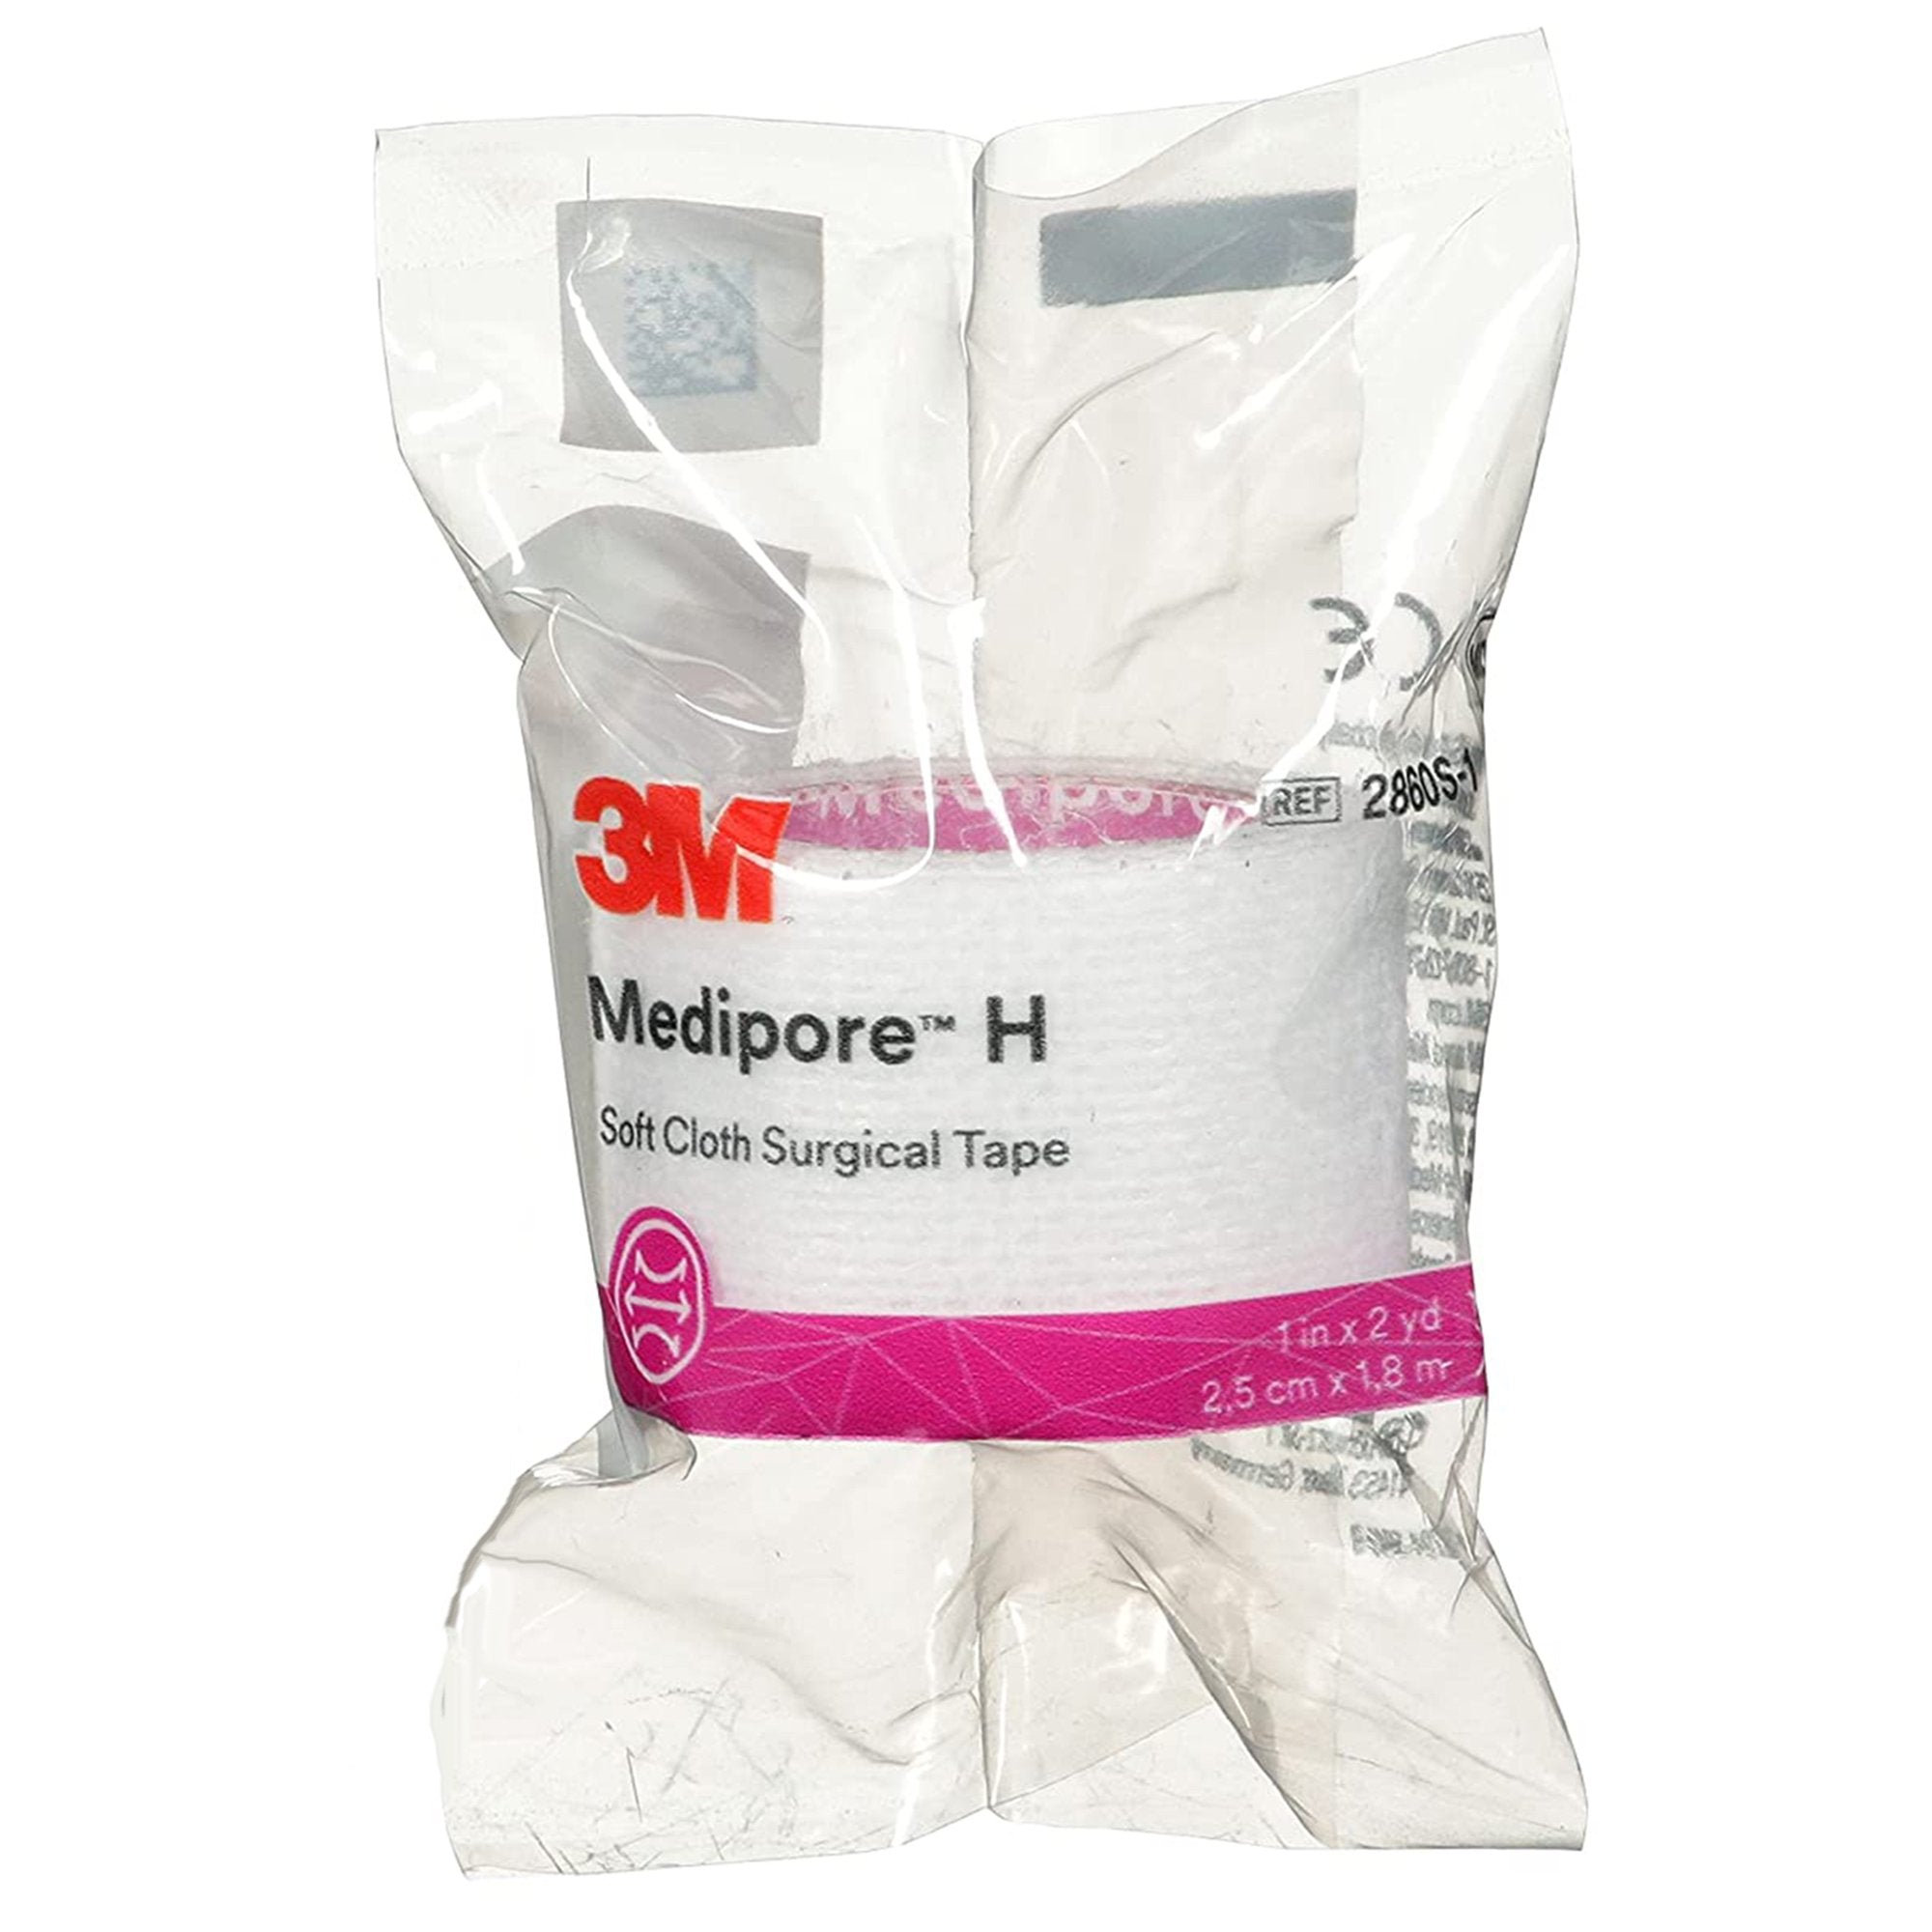 Perforated Medical Tape 3M™ Medipore™ H White 1 Inch X 2 Yard Soft Cloth NonSterile